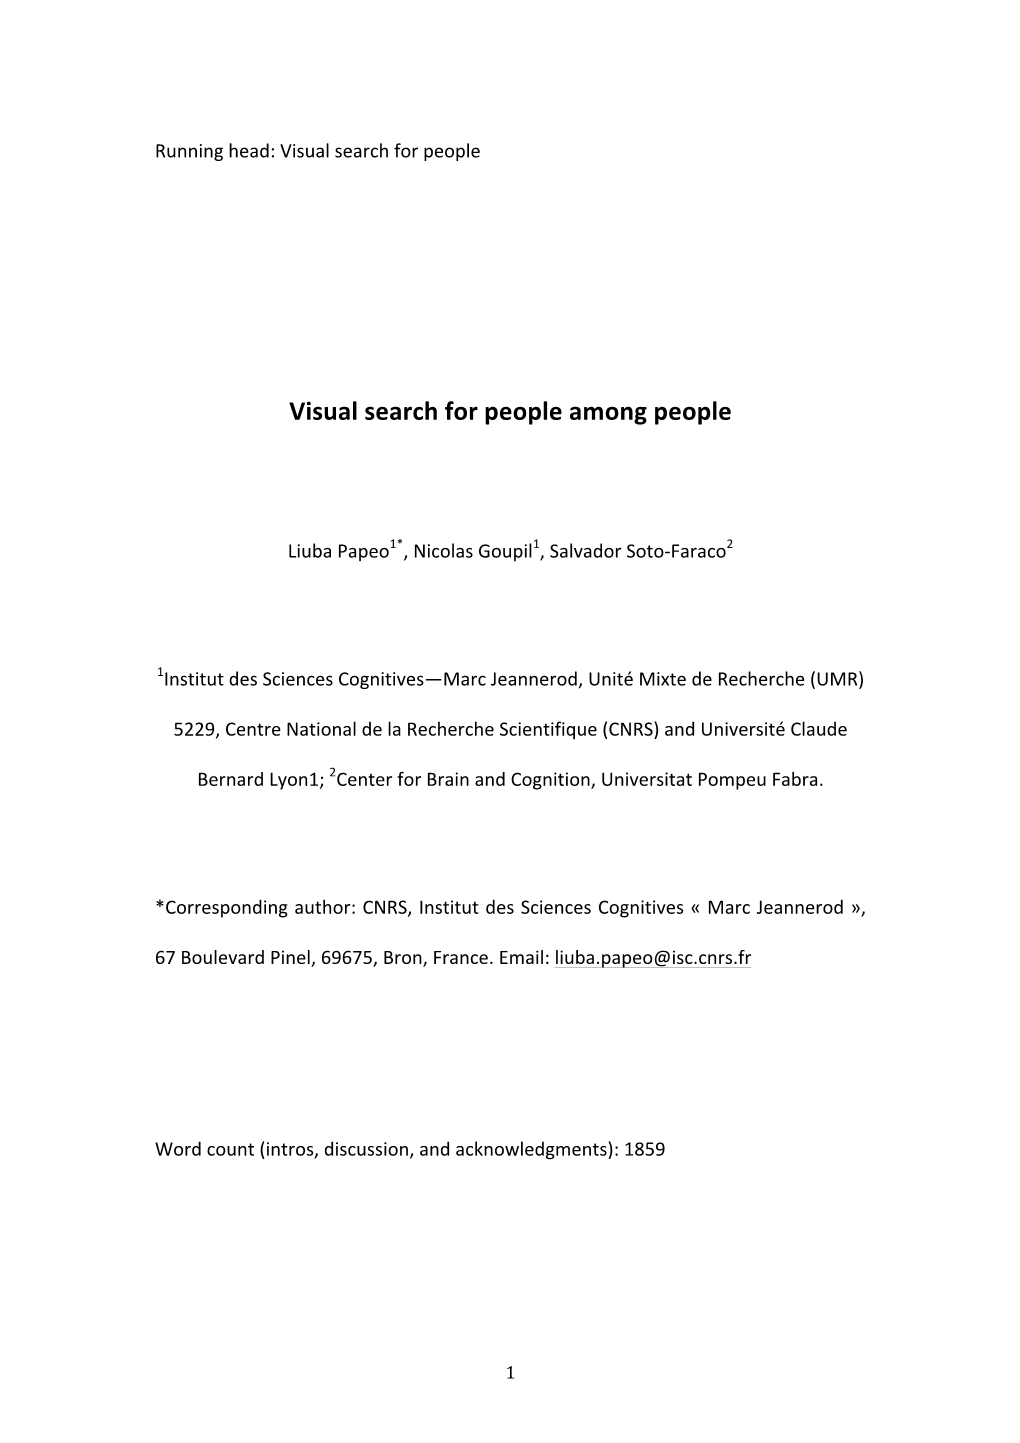 Visual Search for People Among People